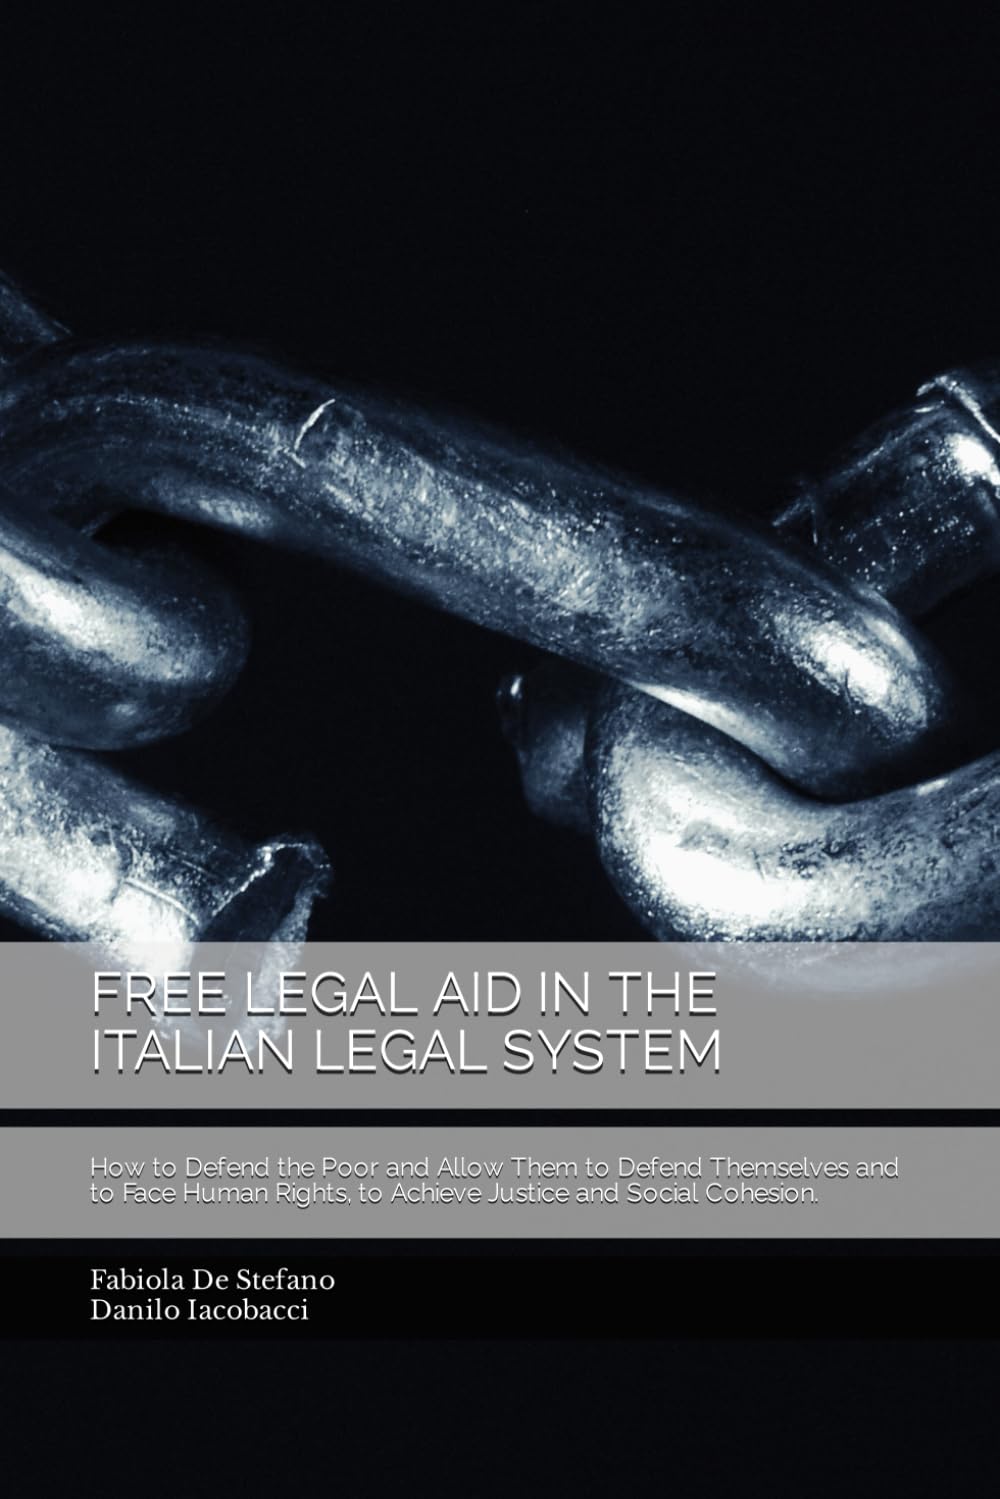 FREE LEGAL AID IN THE ITALIAN LEGAL SYSTEM